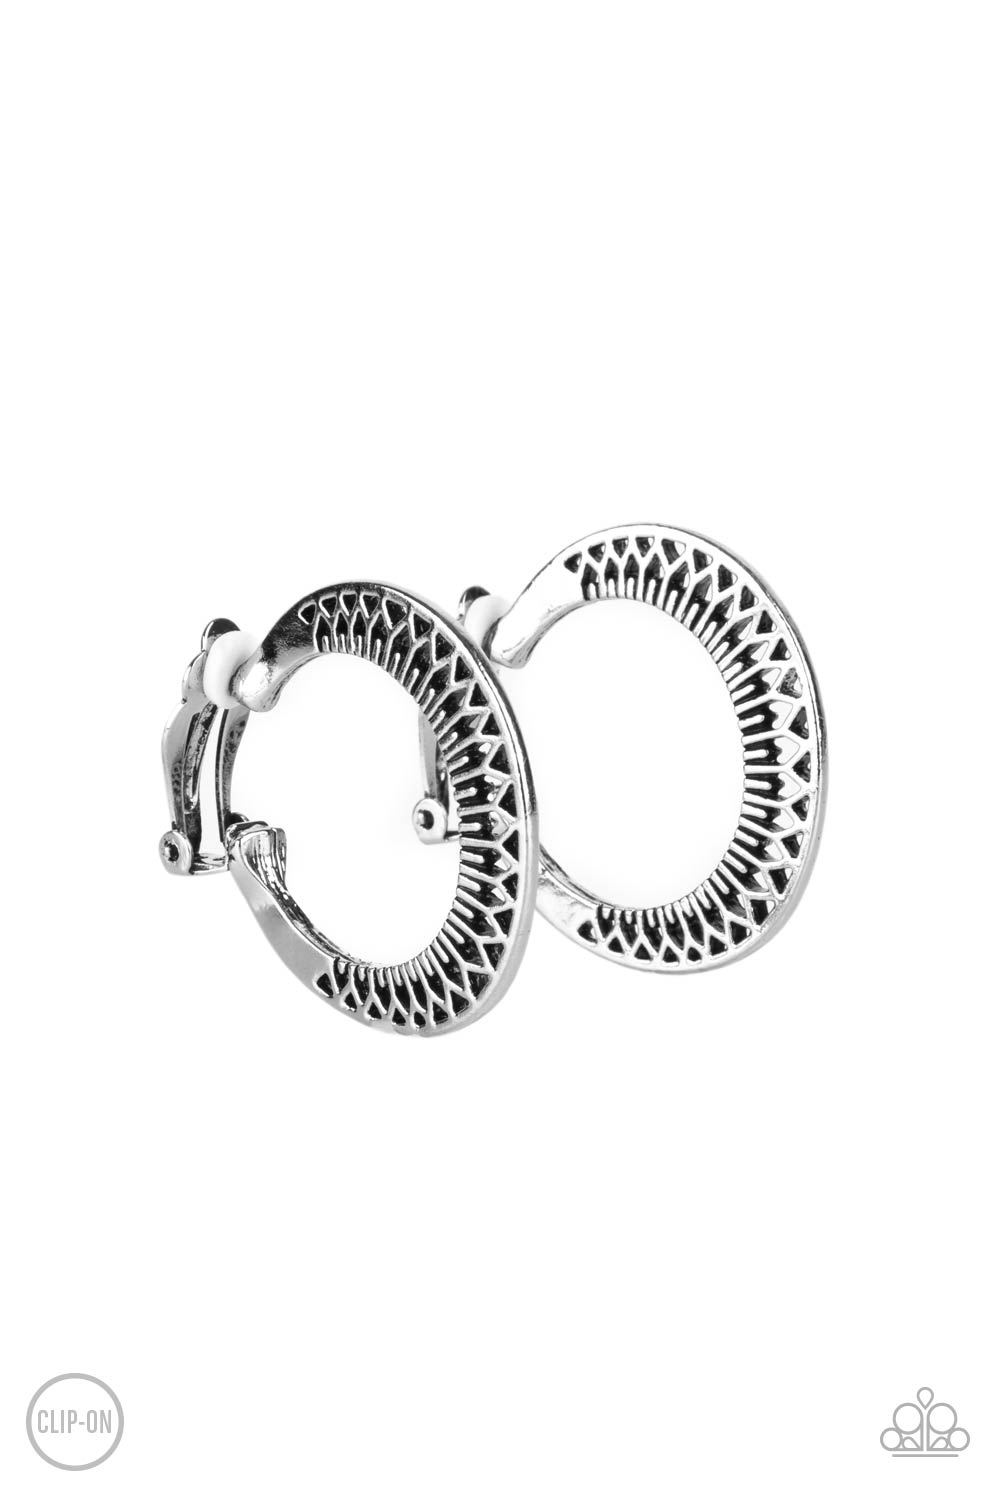 Moon Child Charisma - Silver Clip On Earrings - Paparazzi Accessories